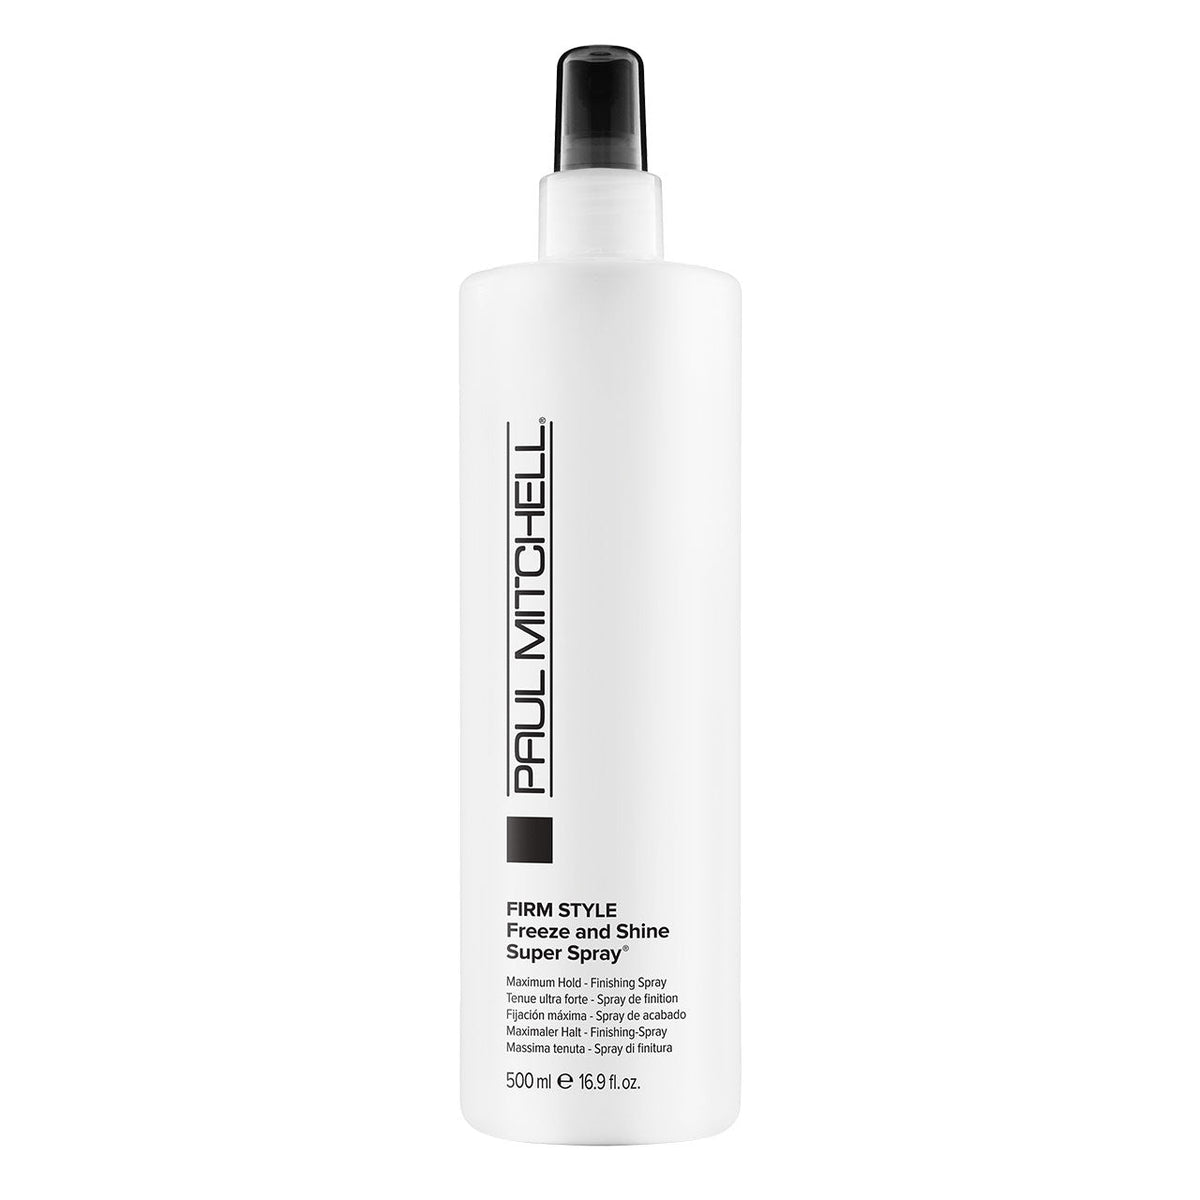 Firm Style Freeze and Shine Super Spray - 500ML - by Paul Mitchell |ProCare Outlet|